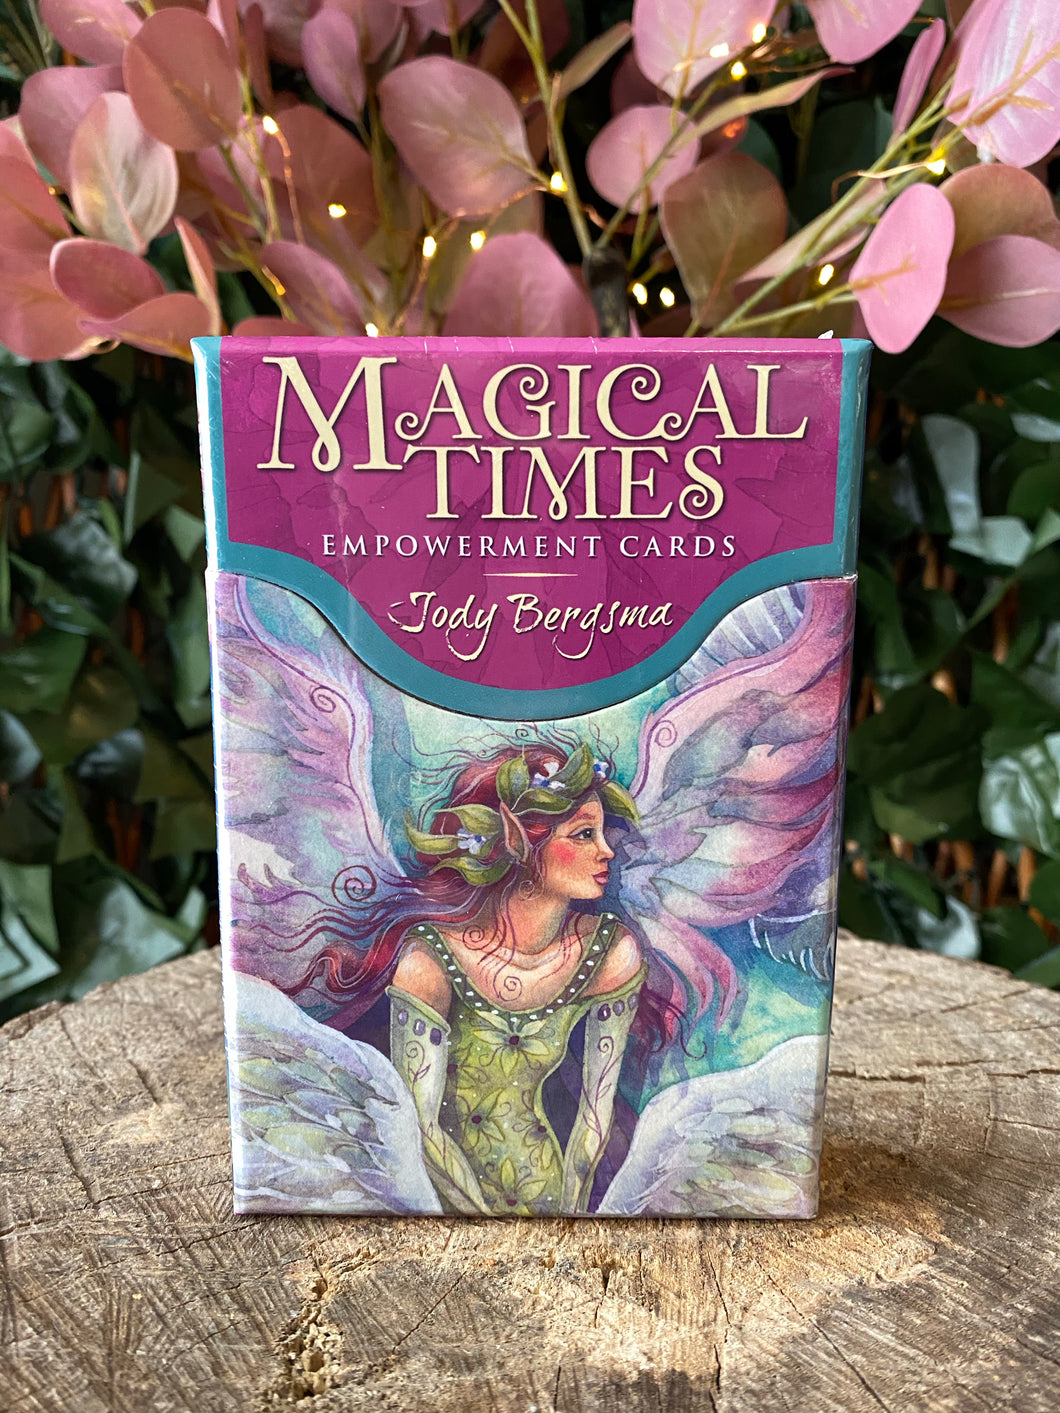 Magical Times - Empowerment cards